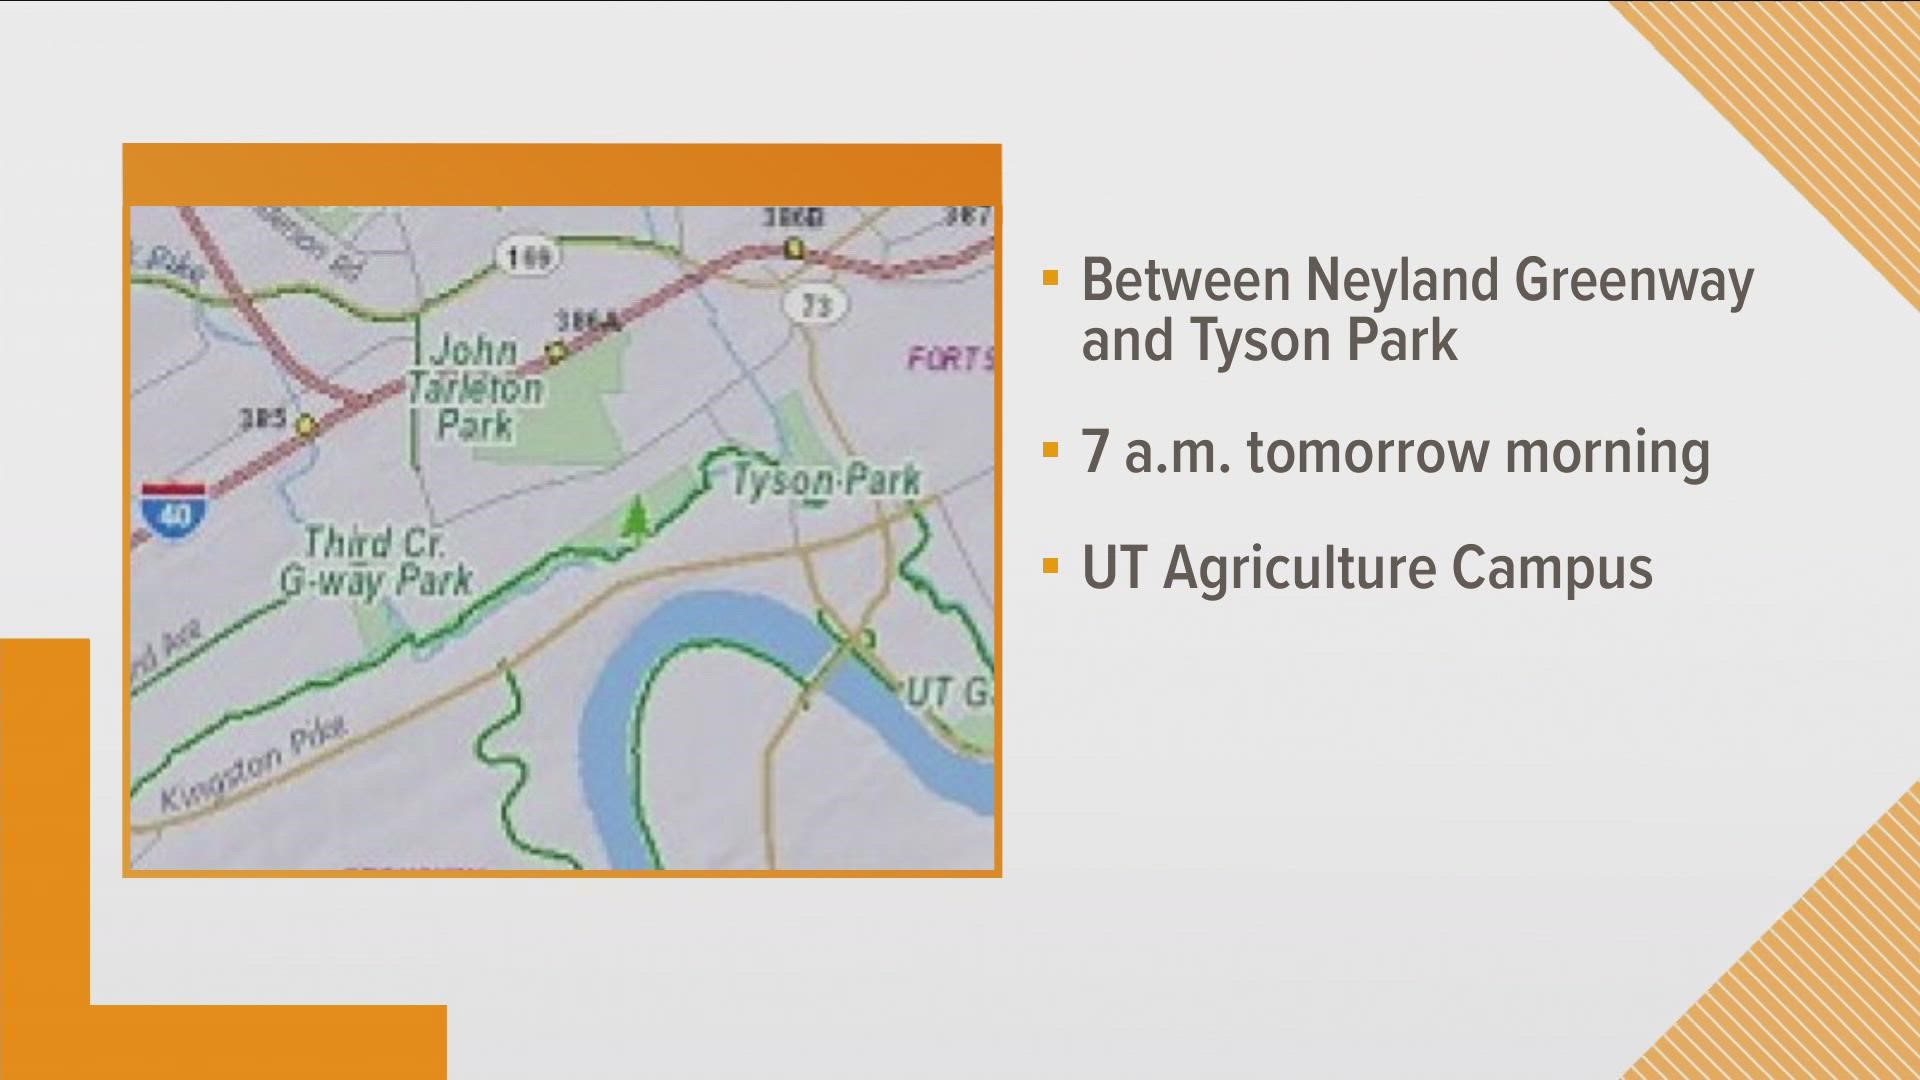 The closure will be near the half-mile marker between Neyland Greenway and Tyson Park.